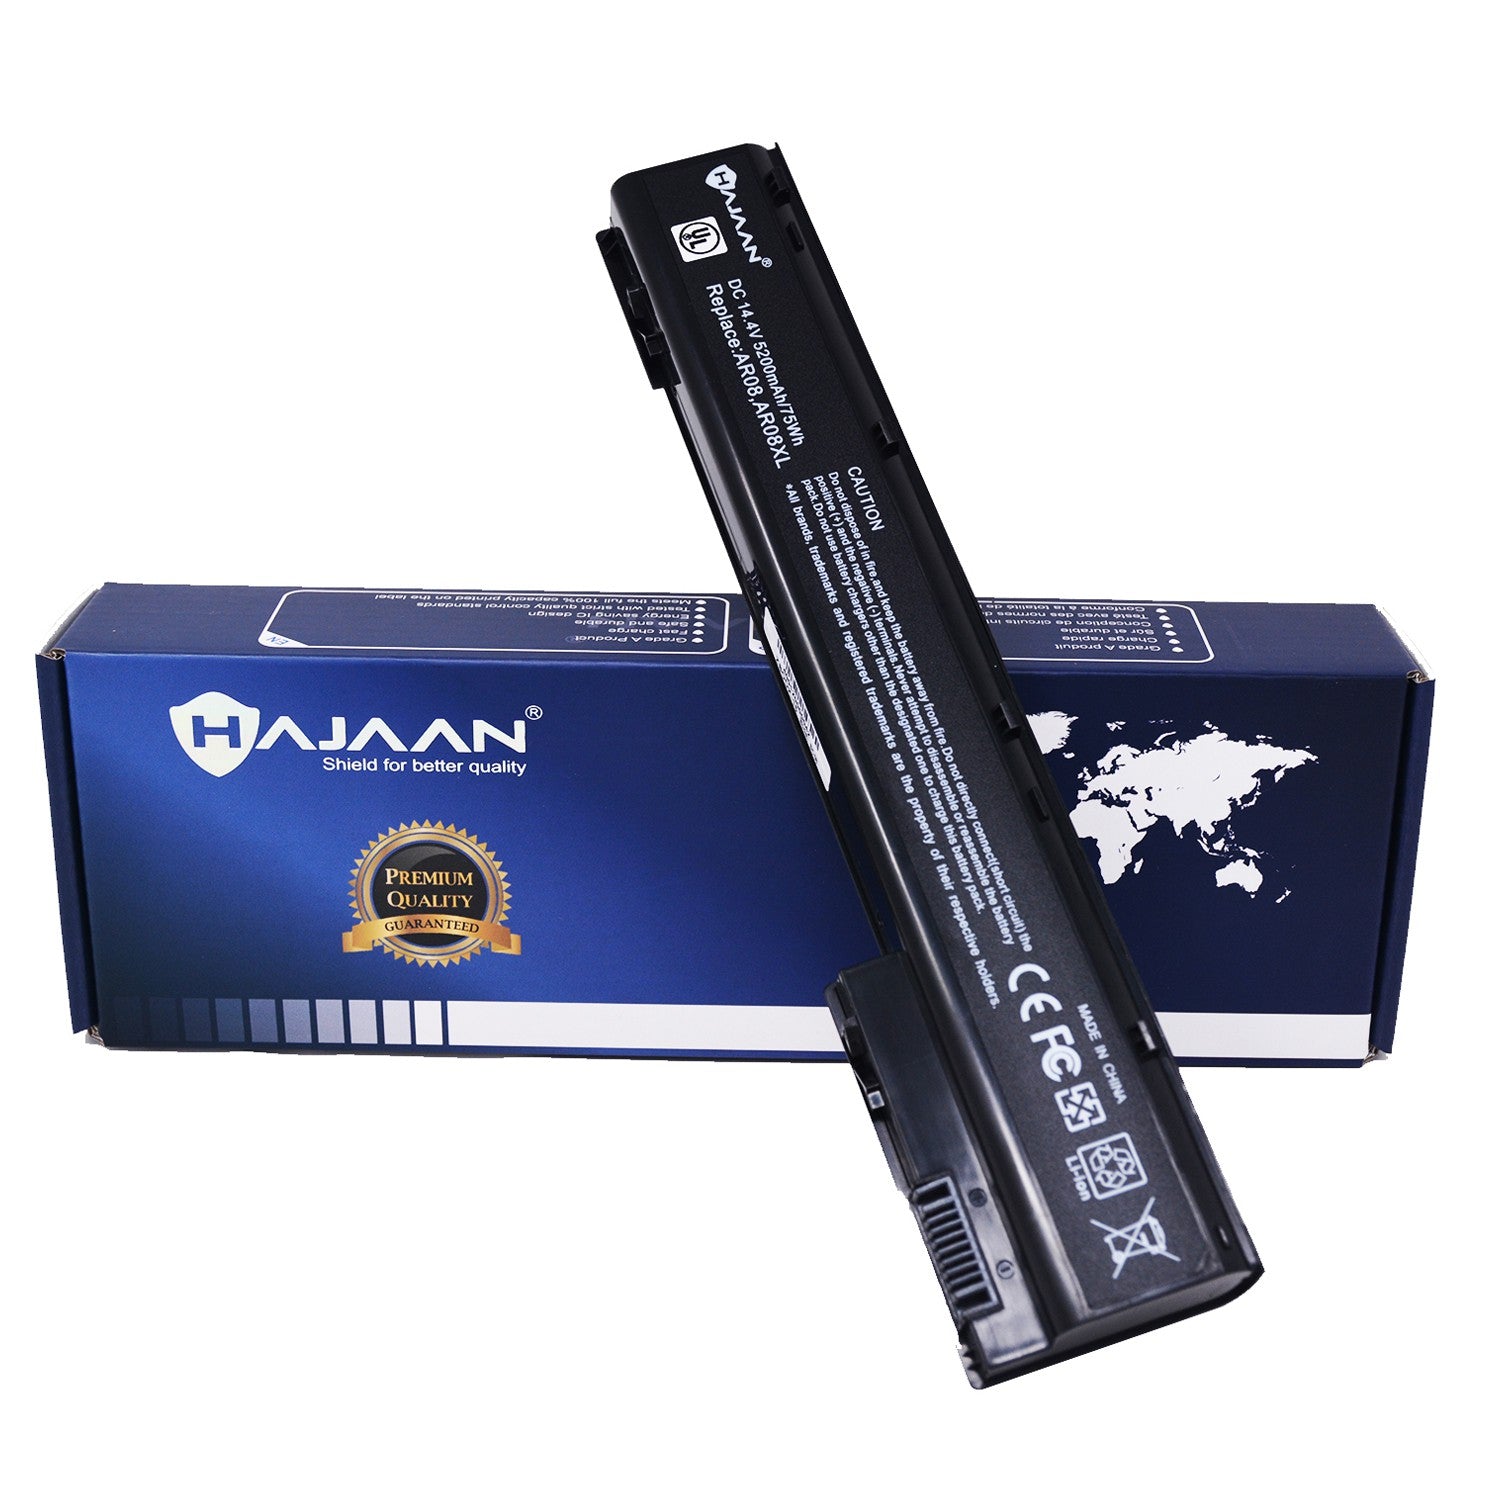 HAJAAN New Laptop Battery for HP ZBook 15 G1/G2, ZBook 17 G1/G2, 707614-121, 707615-141, AR08, AR08XL, HSTNN-1B4H, HSTNN-1B4I ( Li-ion, 5200mAh/75Wh, 8-Cells,14.4 V) 1 Year Warranty